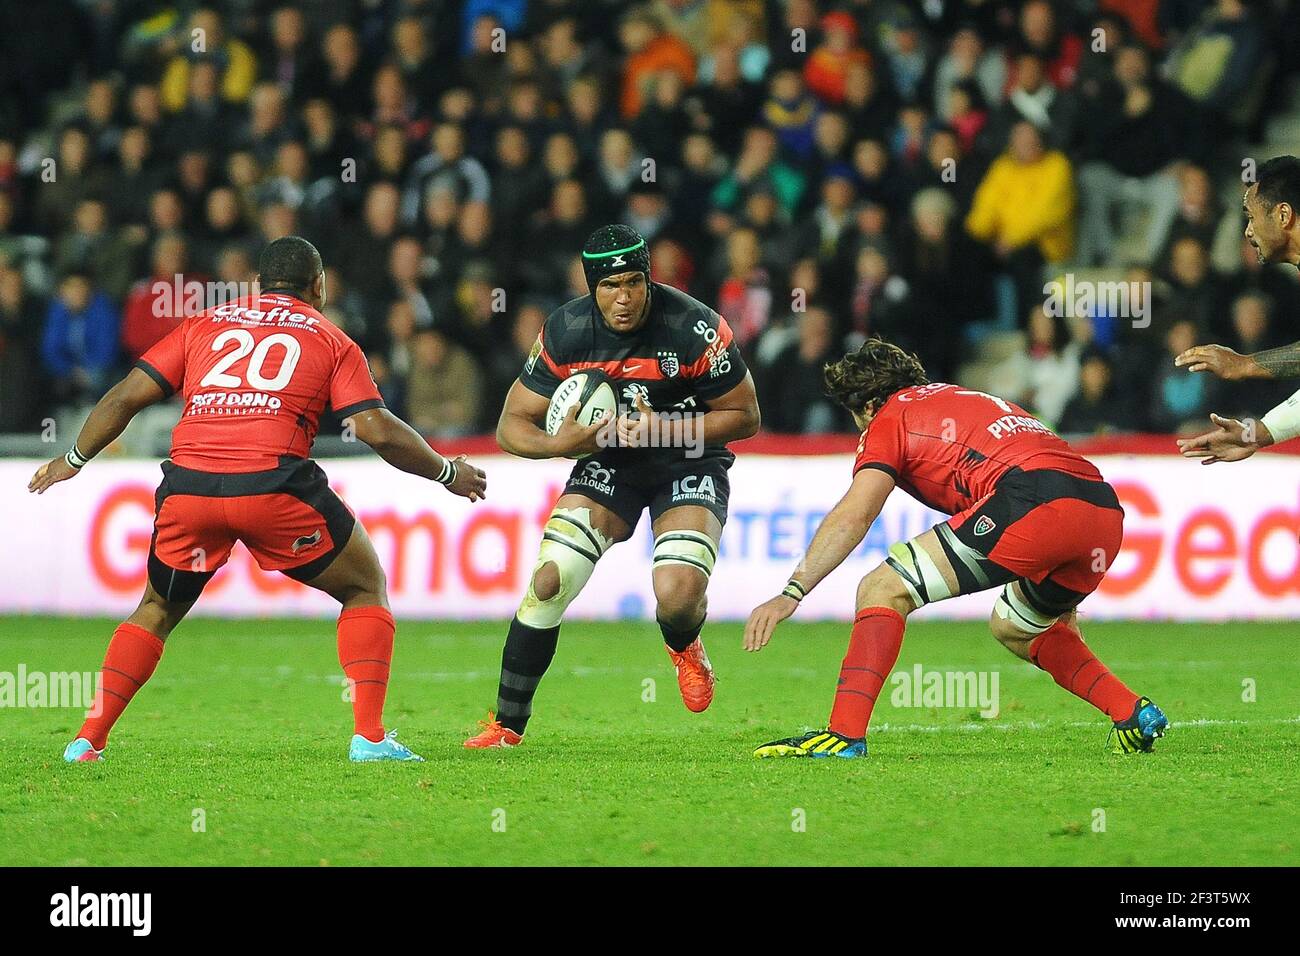 RUGBY - FRENCH CHAMPIONSHIP 2012/2013 - TOP 14 - 1/2 FINAL - RC TOULON v  STADE TOULOUSAIN - 24/05/2013 - NANTES (FRA) - PHOTO PASCAL ALLEE / DPPI -  Thierry Dusautoir (ST-T) / Steffon Armitage (RCT Stock Photo - Alamy